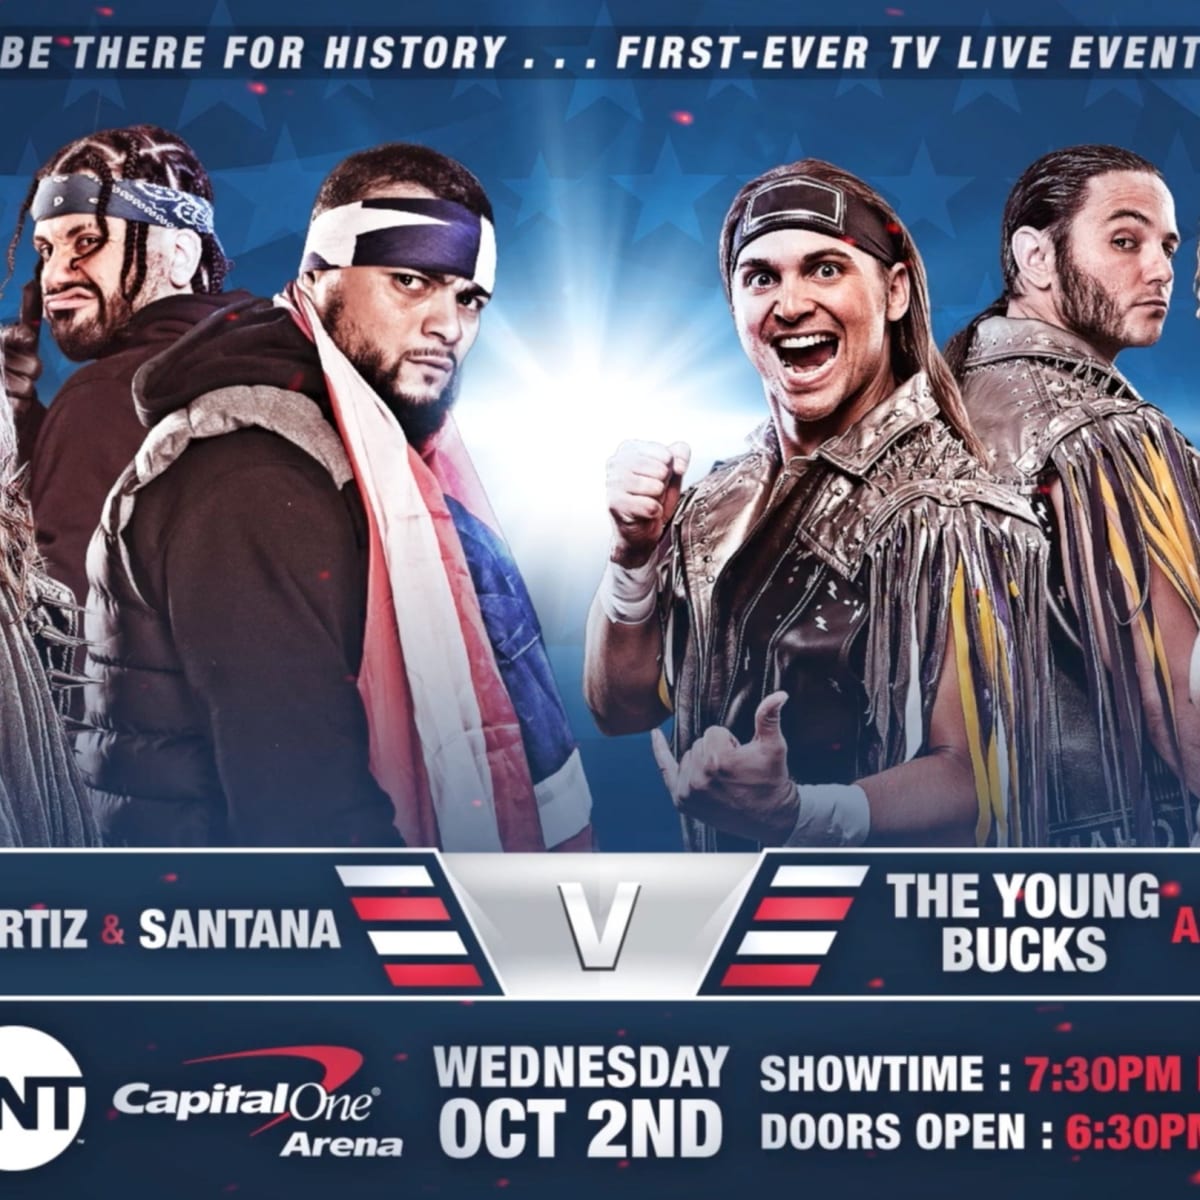 You Can Now Watch the First AEW Dynamite on Demand